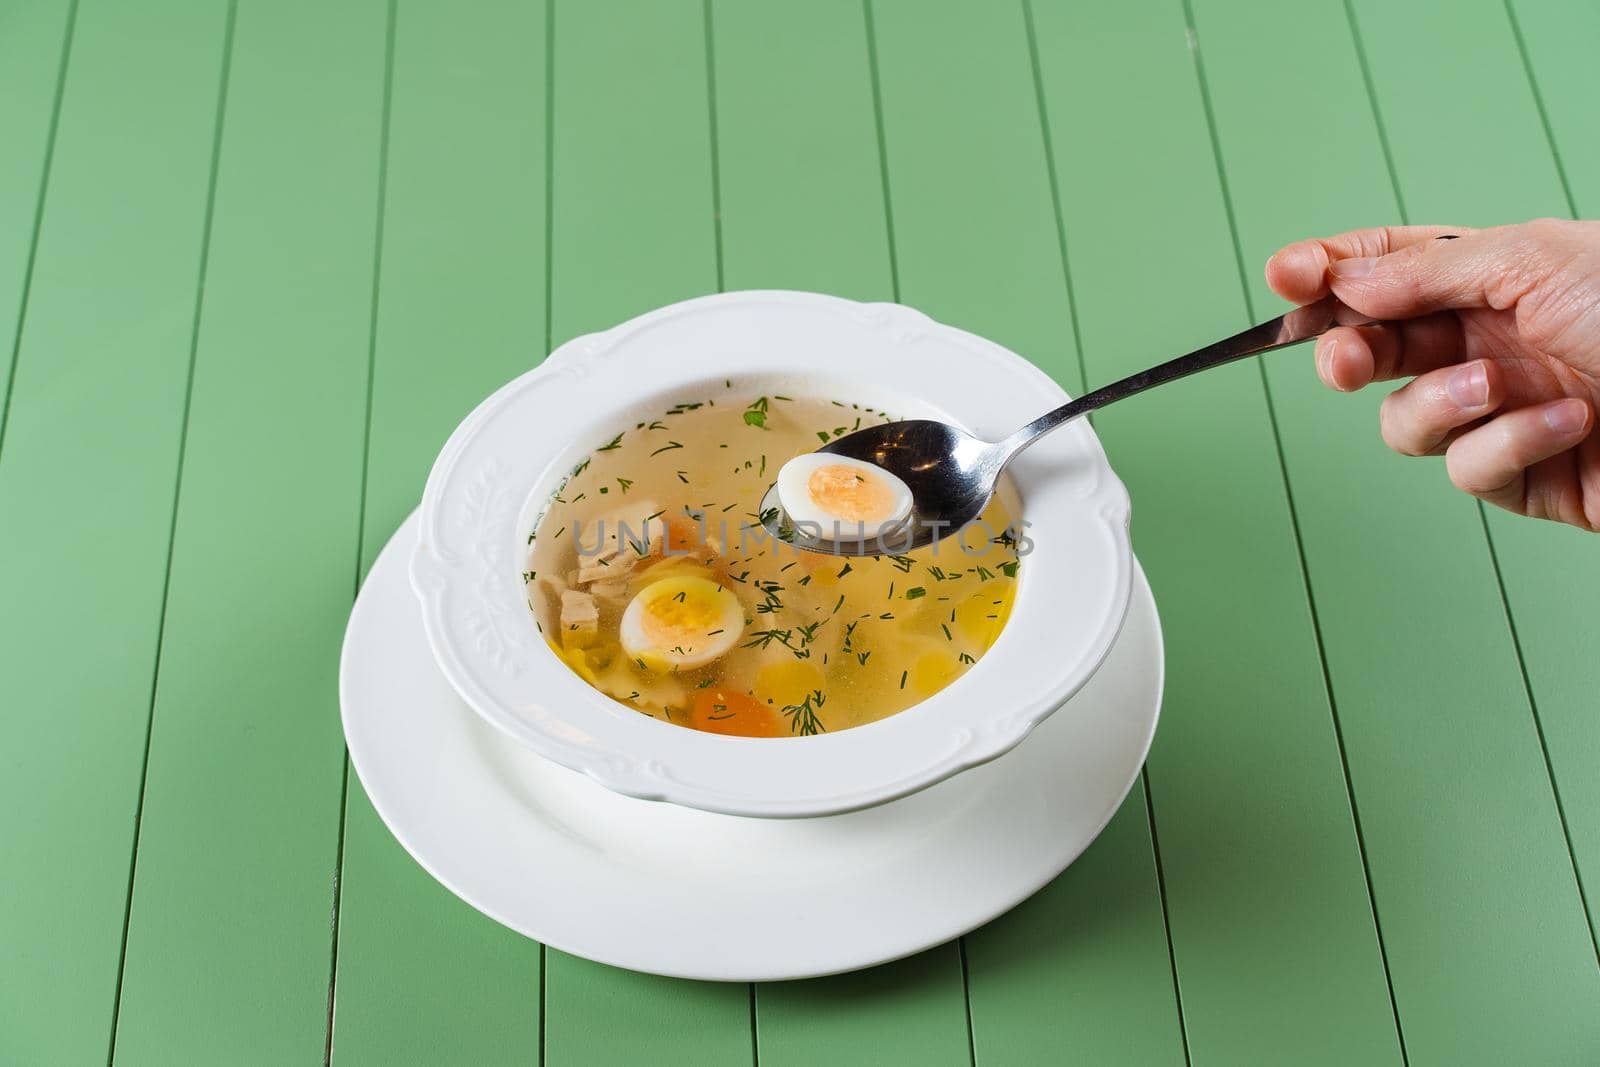 Chicken broth with meat, carrots, herbs and quail egg in a white plate on a green background